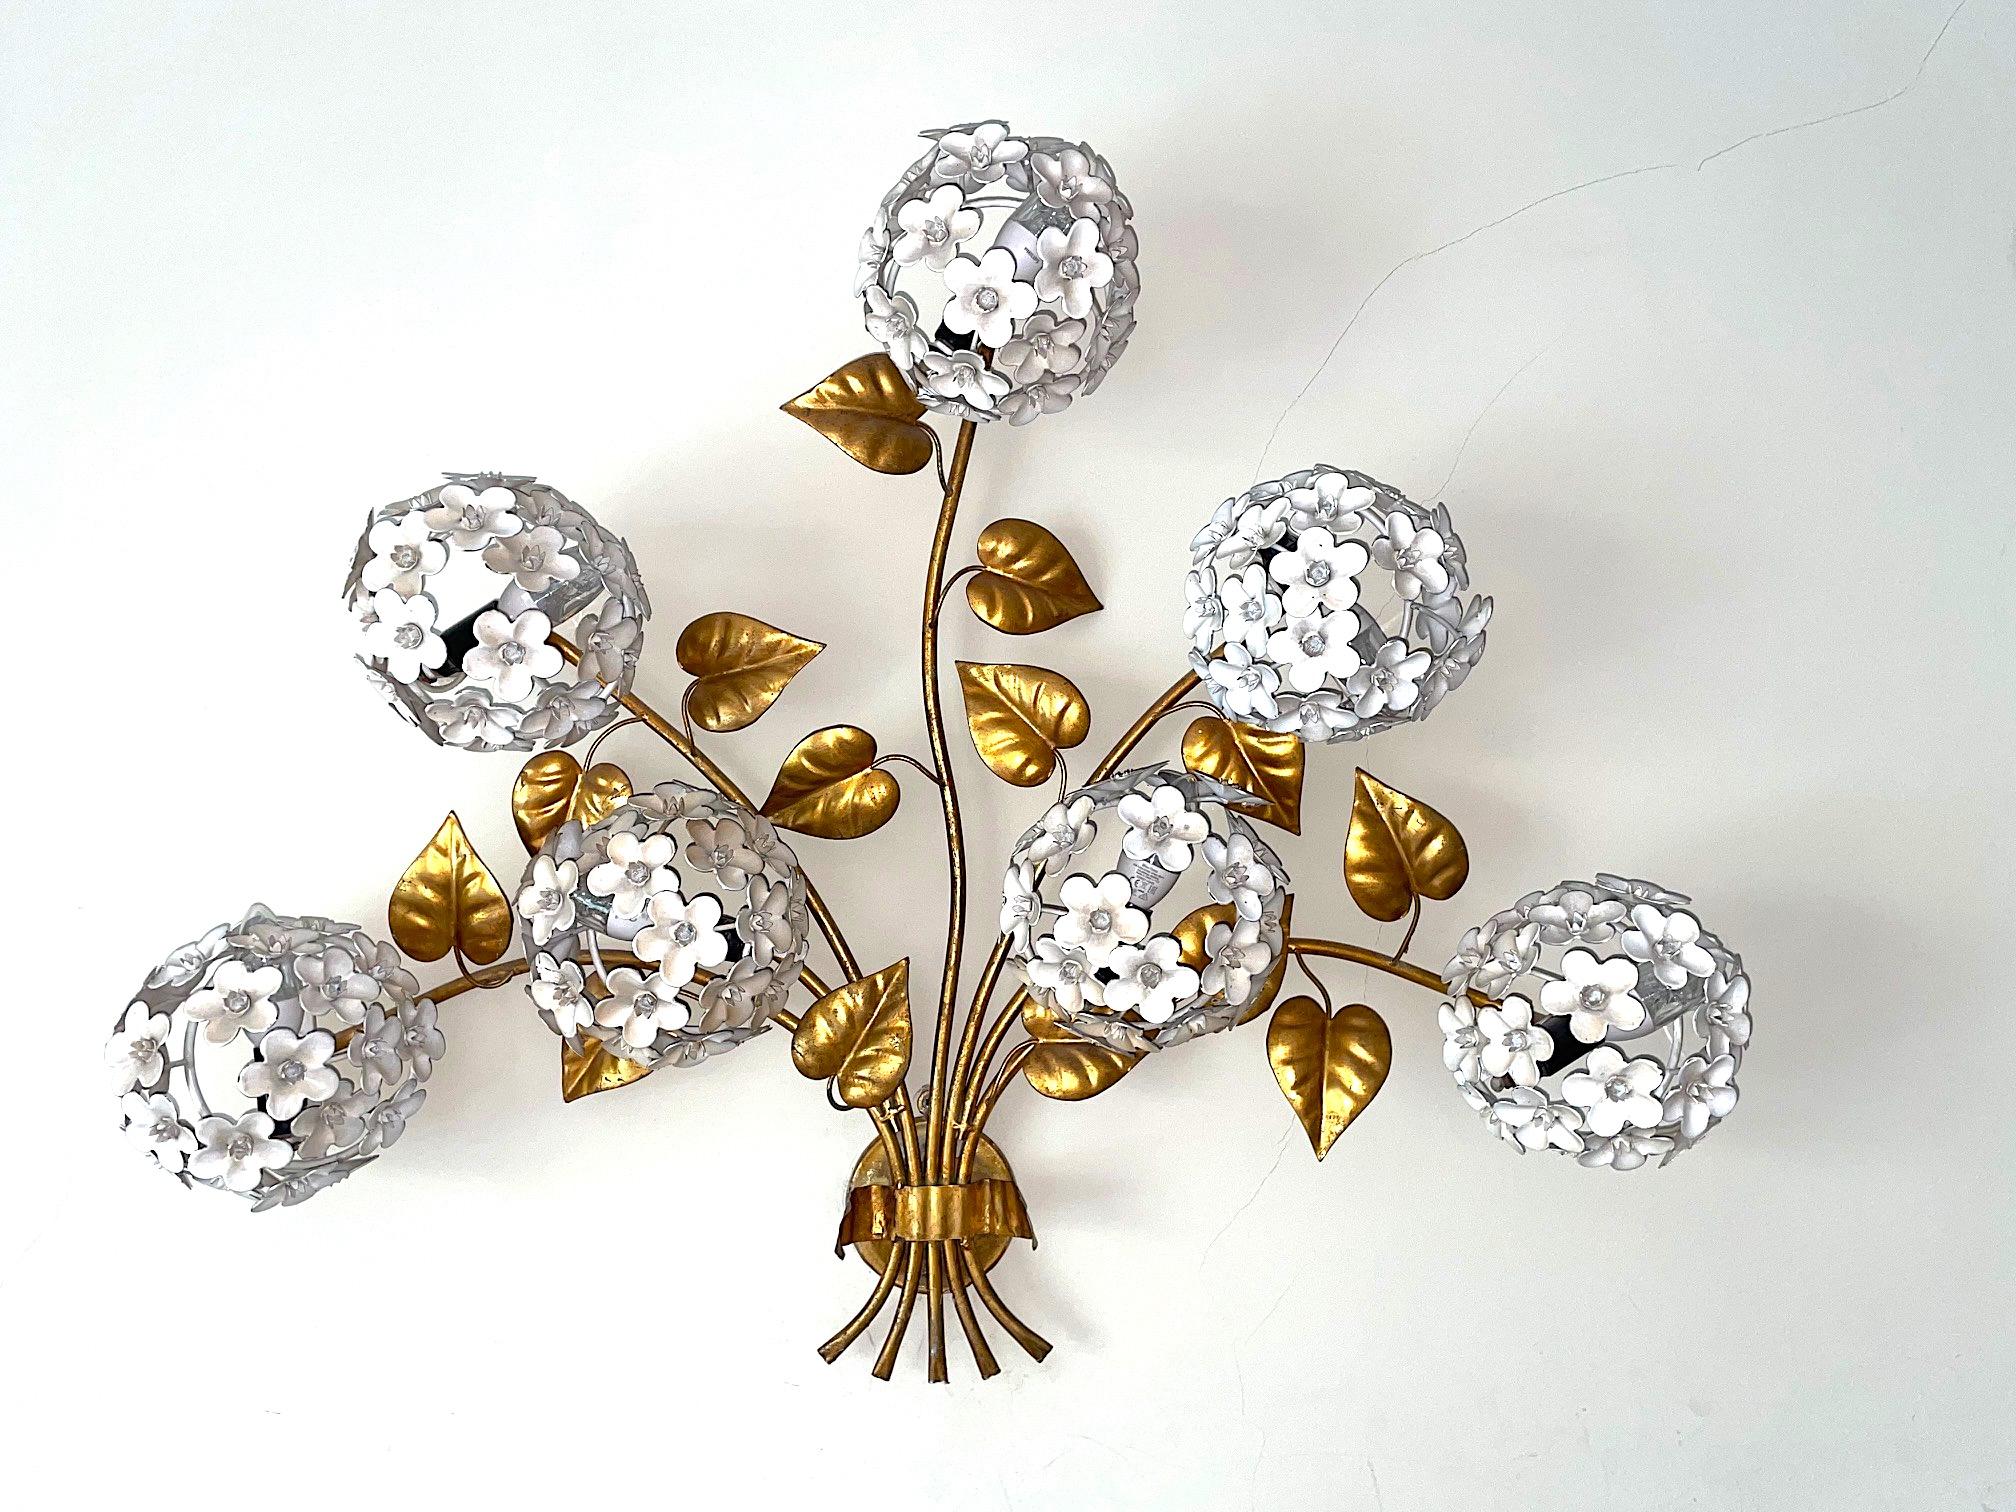 Wonderful 1950s Hydrangea Wall Light with Seven Lights Behind the Flowers 7